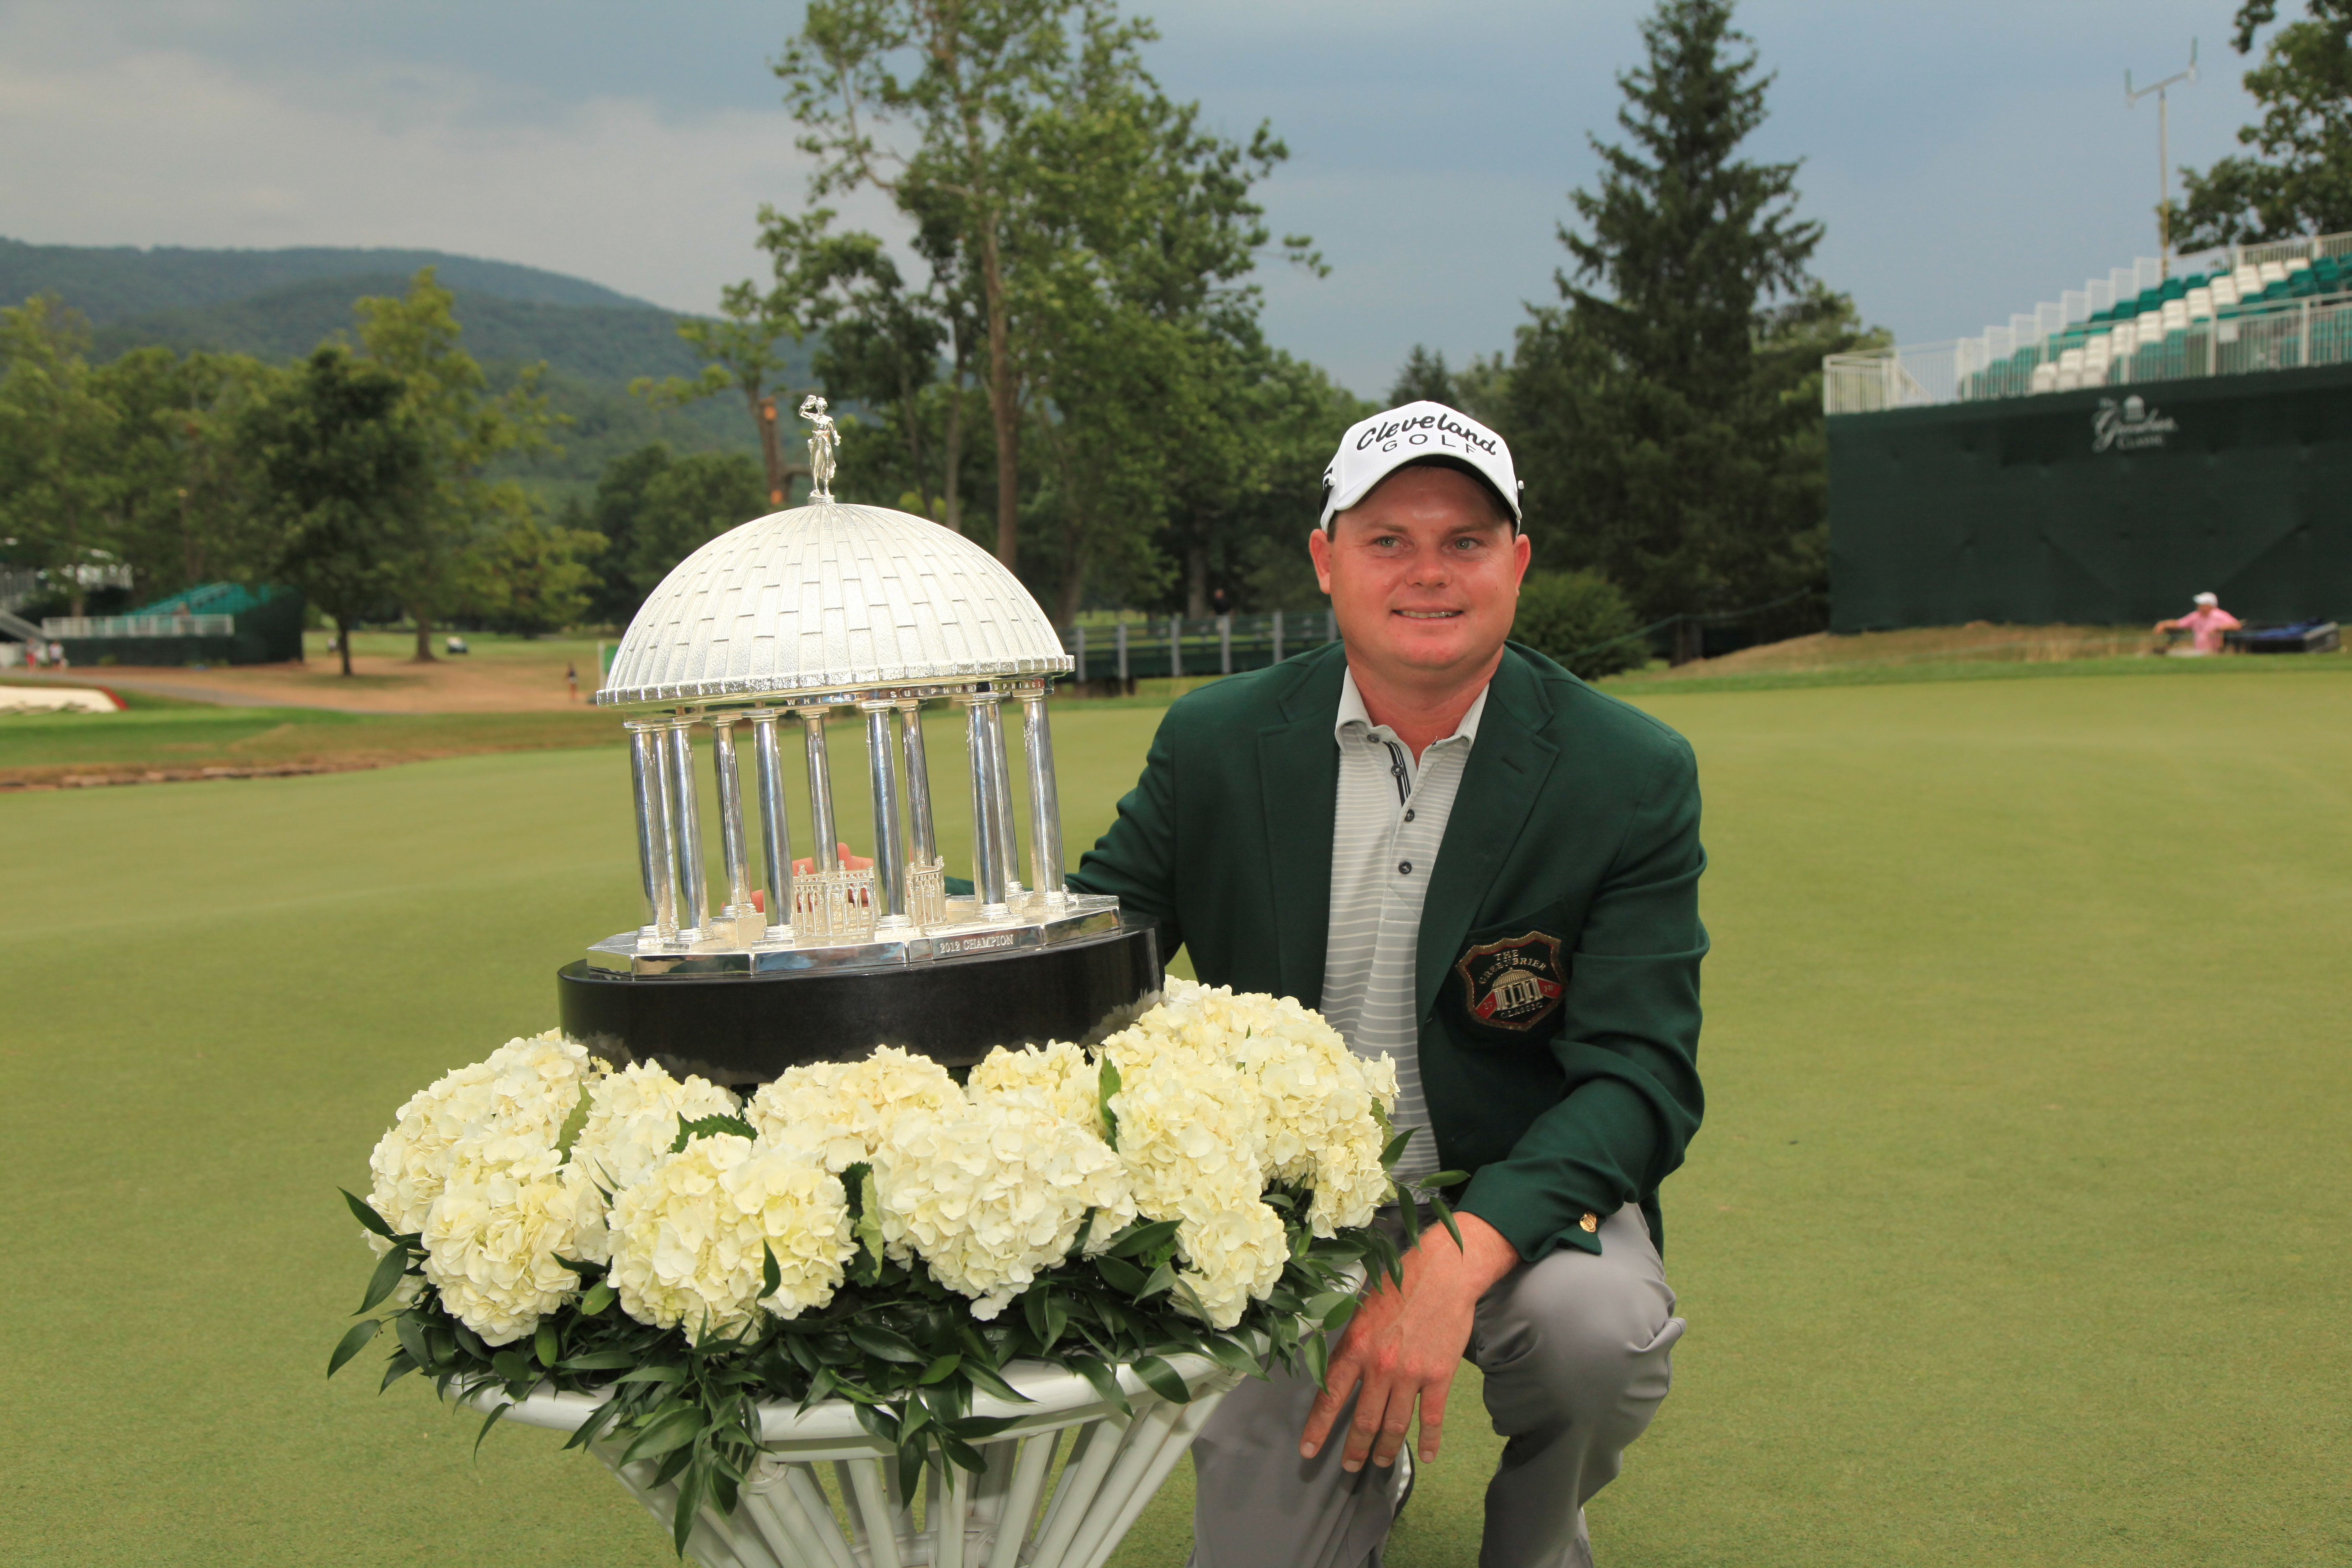 Greenbrier Classic trophy made by Malcolm DeMille